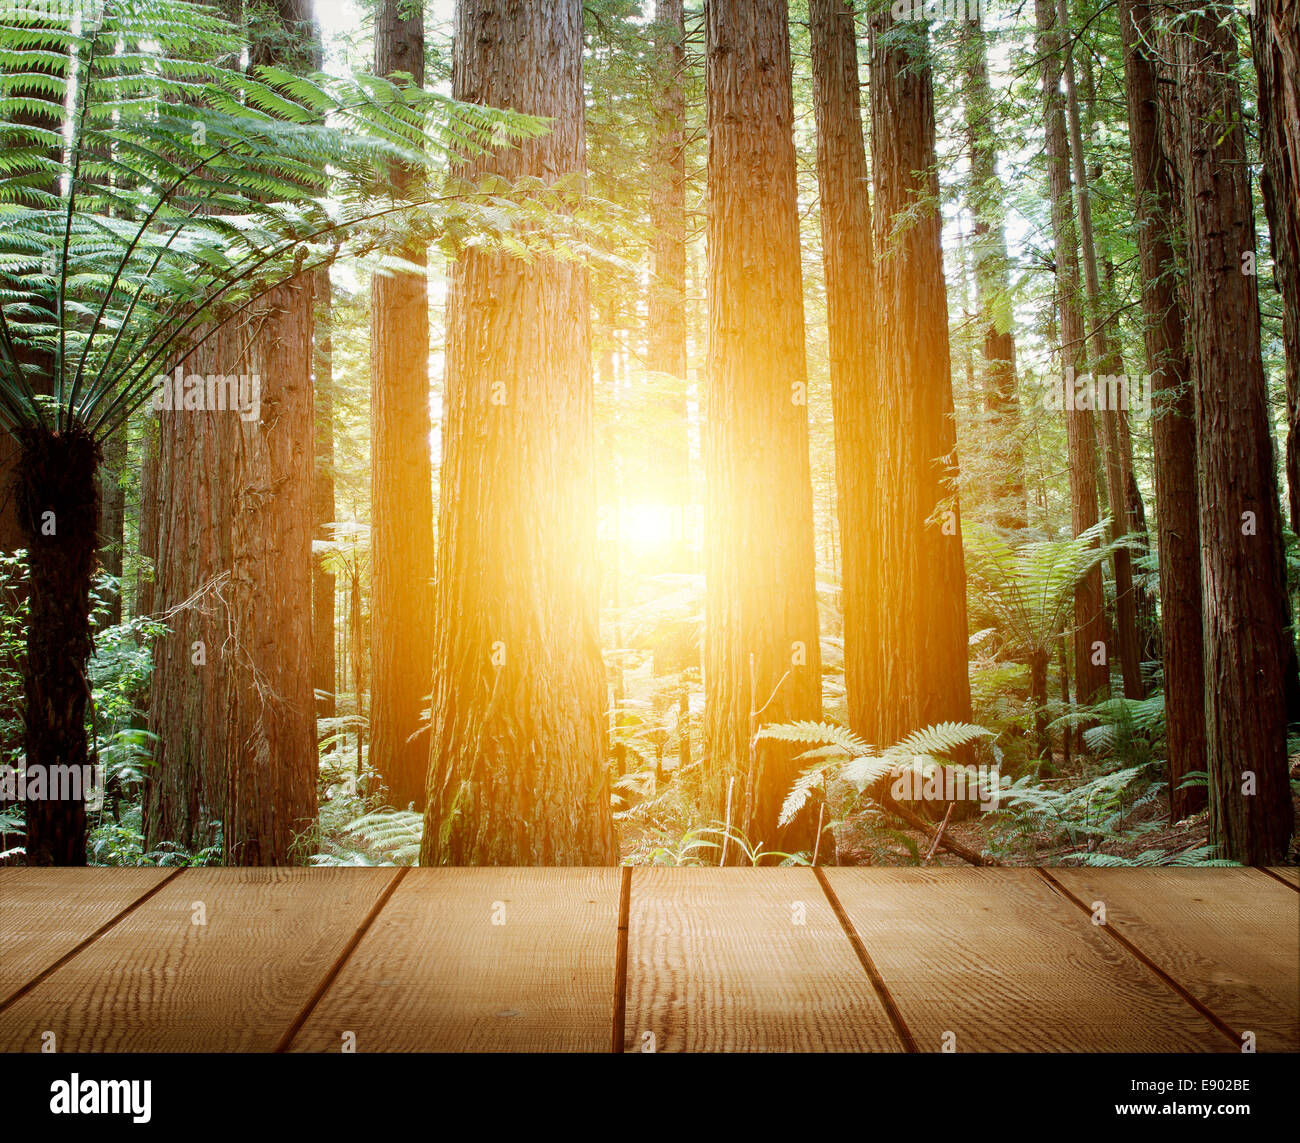 Sunlight in redwood trees forest Stock Photo